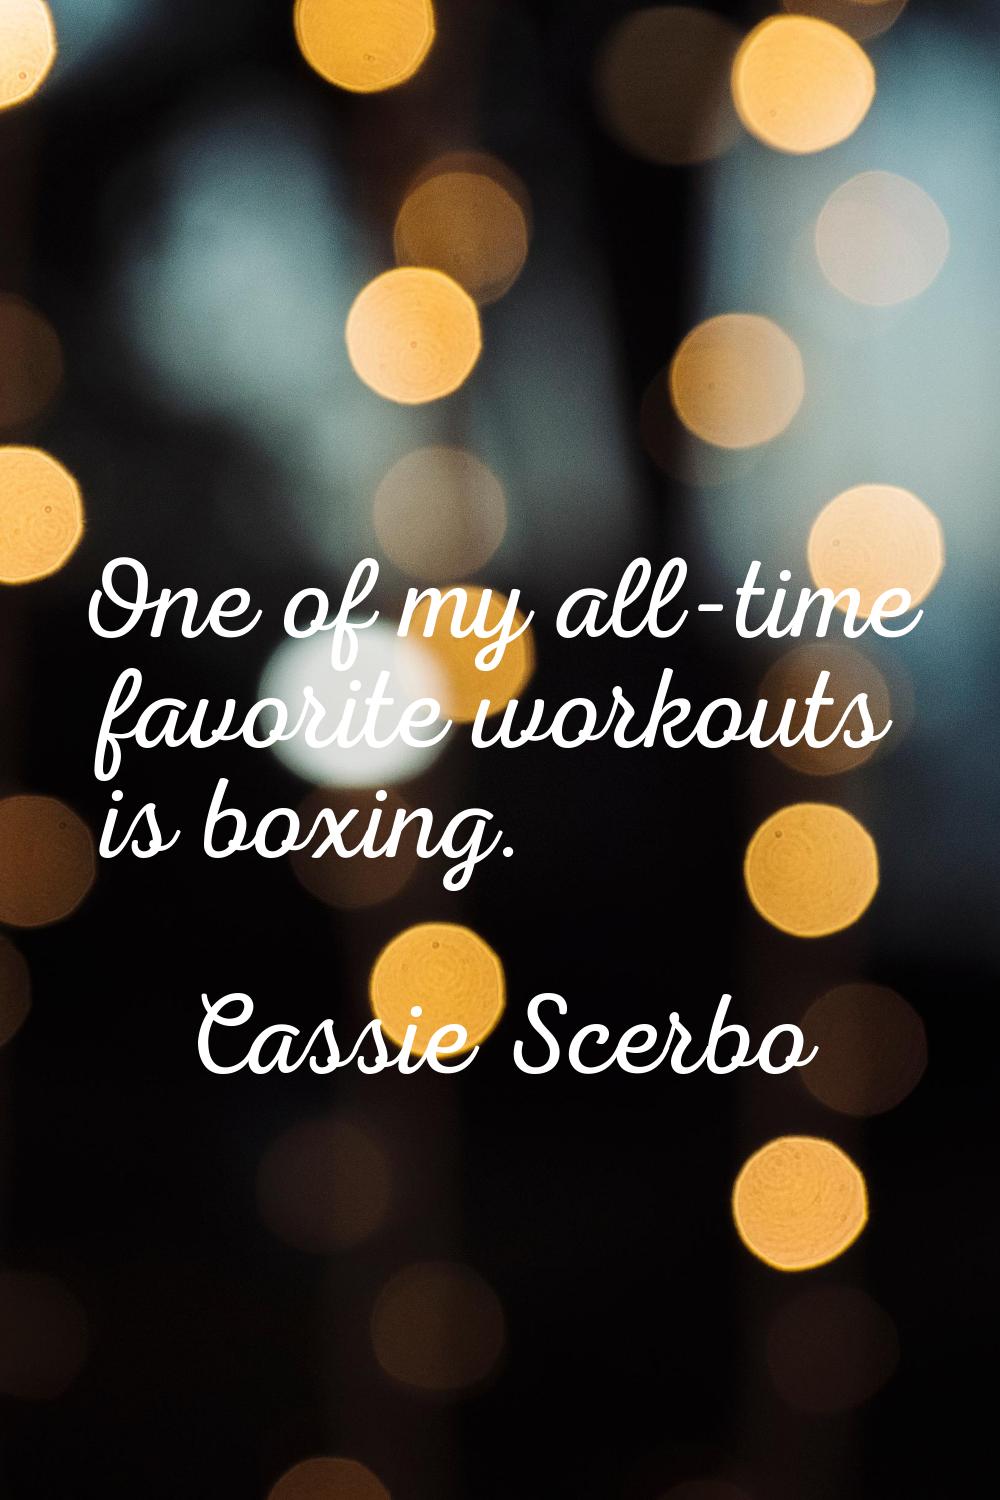 One of my all-time favorite workouts is boxing.